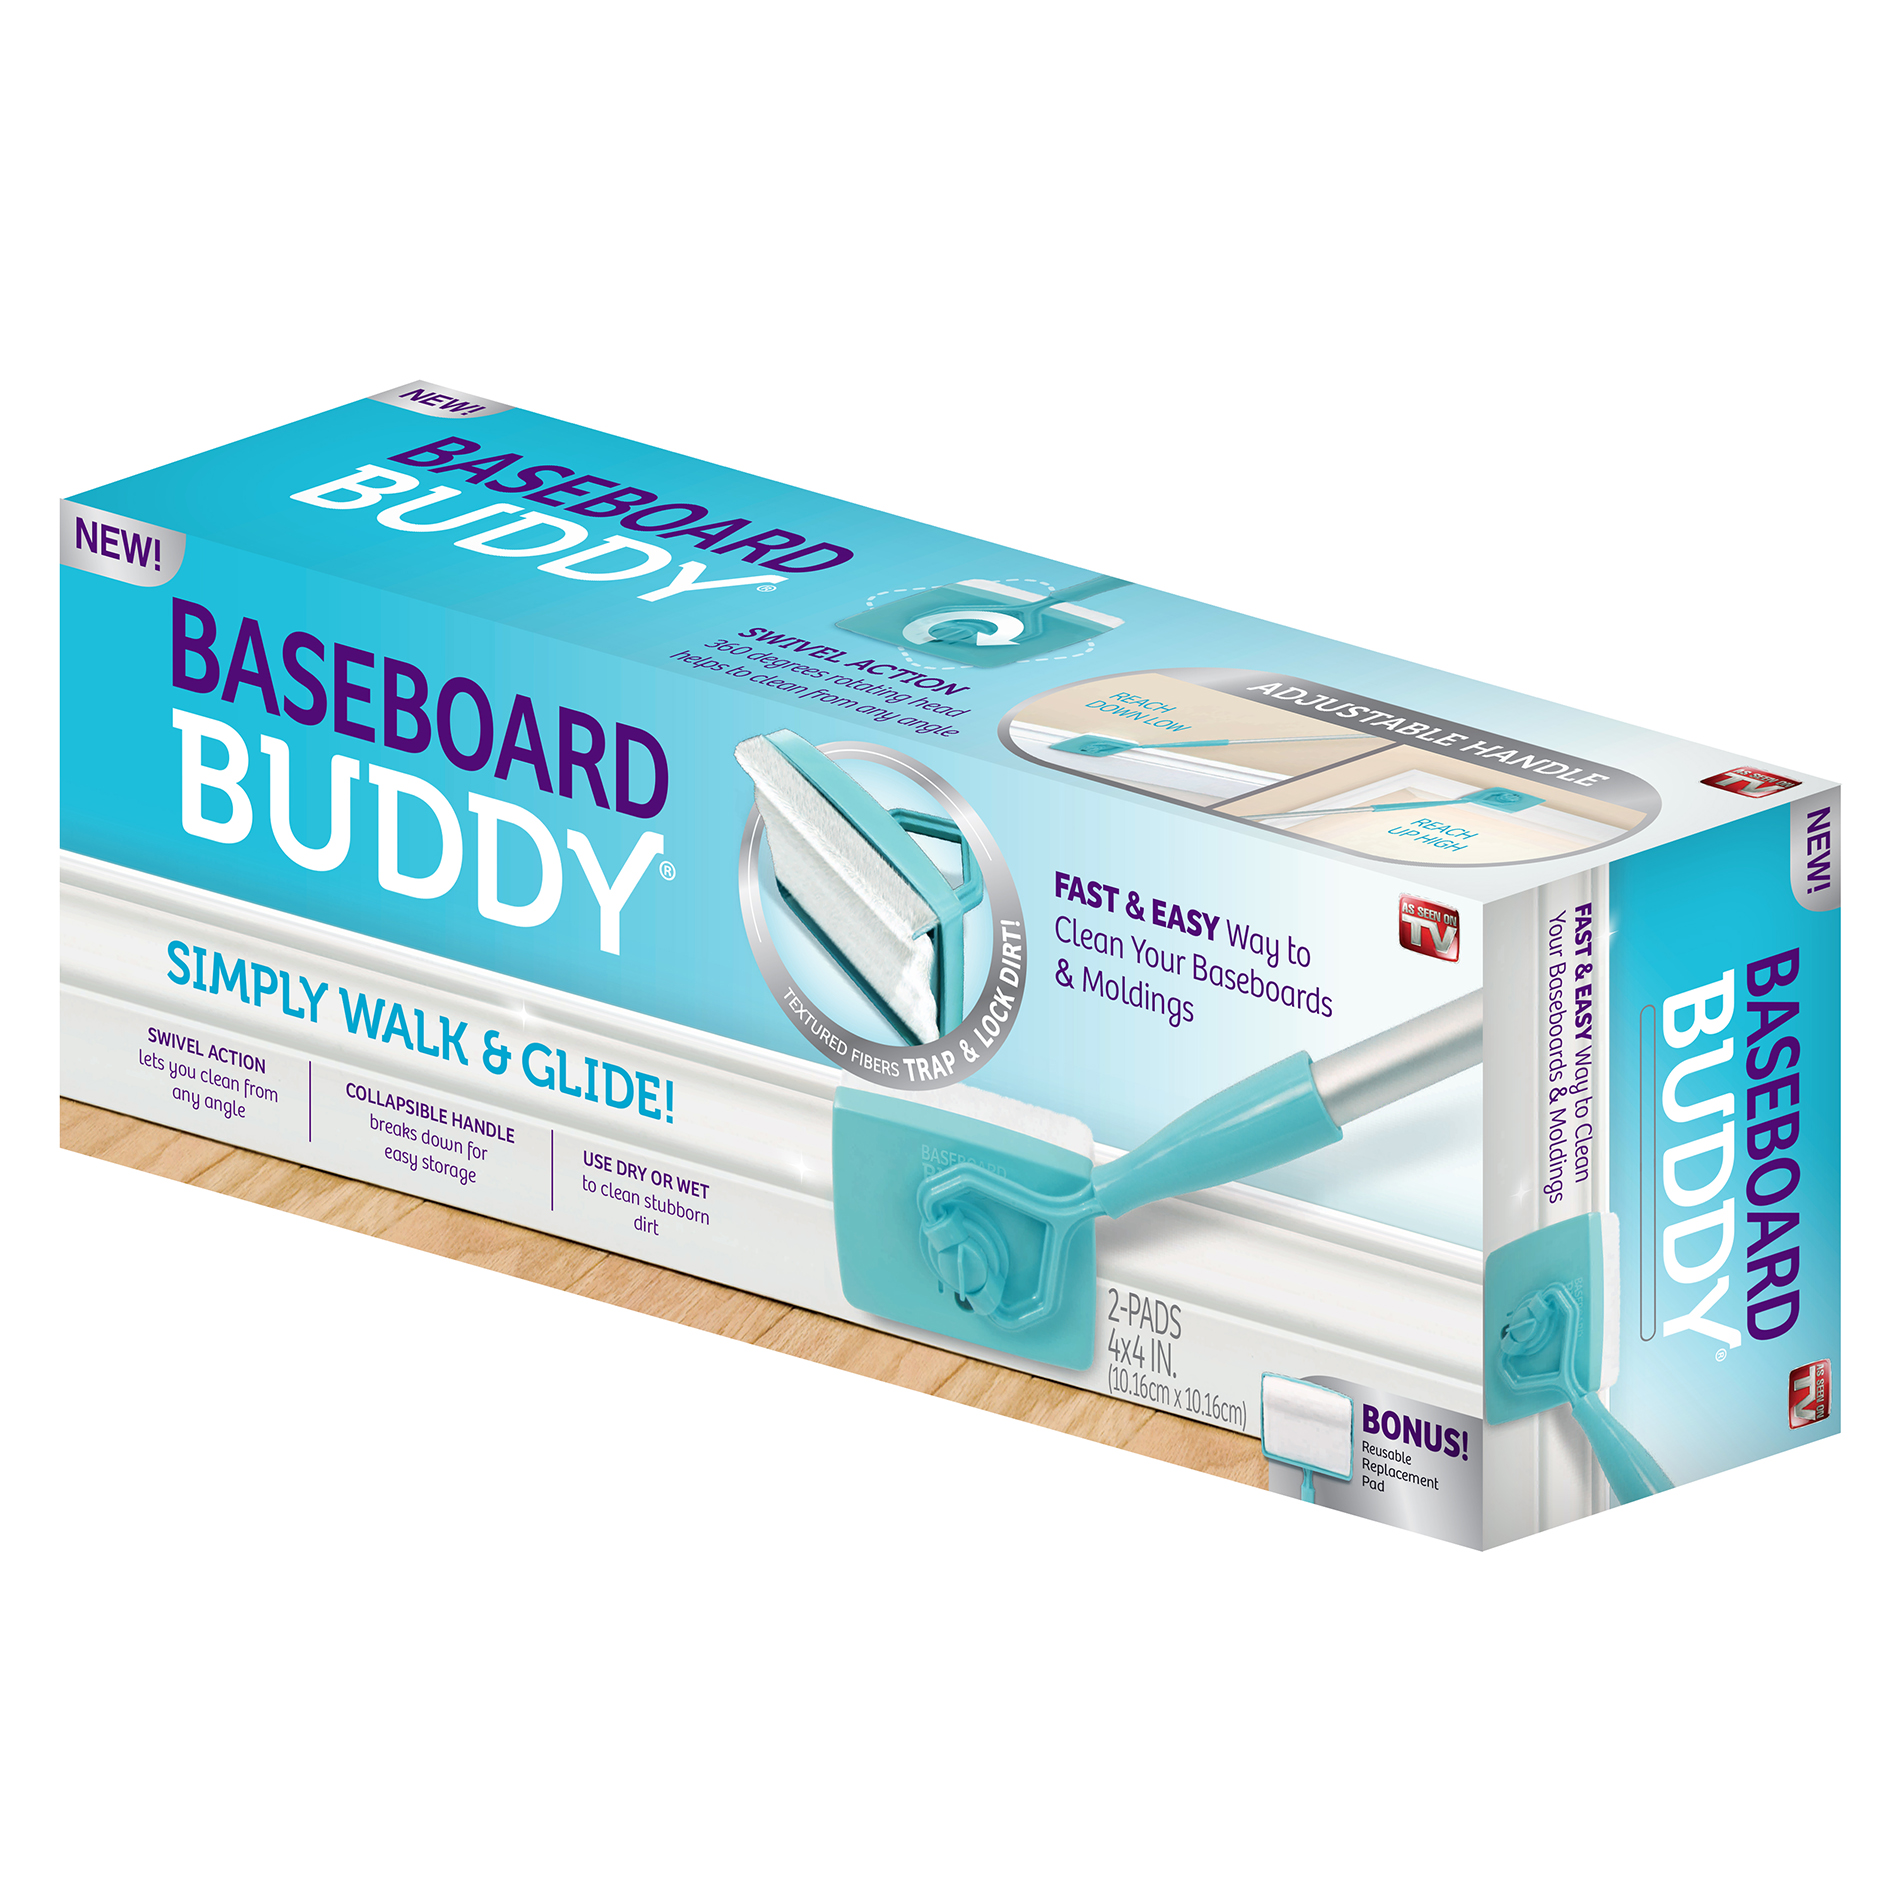 We Tried The As-Seen-On-TV BaseBoard Buddy And It Wasn't As Easy As It Looks